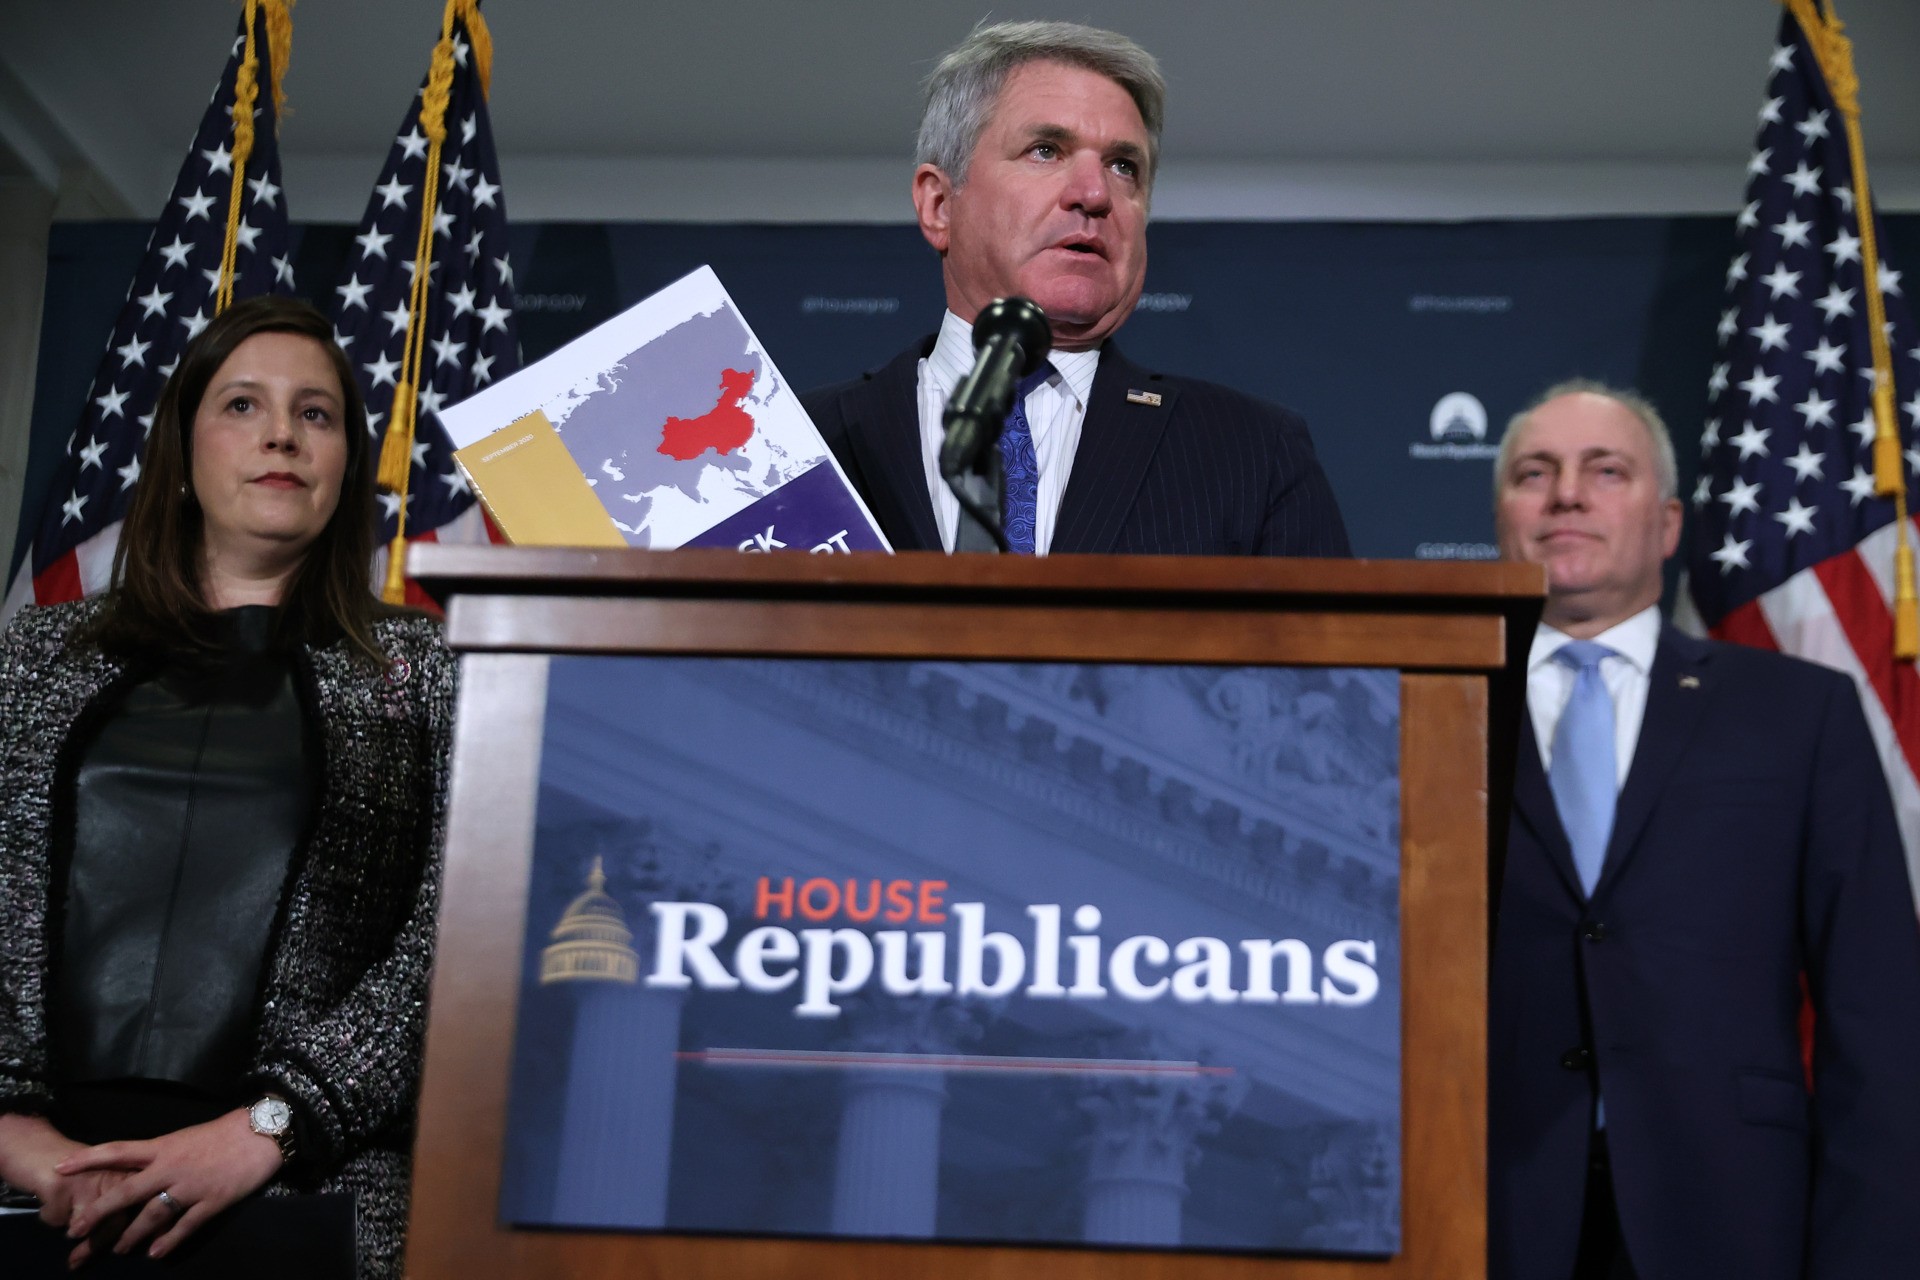 WASHINGTON, DC - OCTOBER 20: Rep. Mike McCaul (R-TX) talks about China during a news conference with House Republican Conference Chair Rep. Elise Stefanik (R-NY) (L) and House Minority Whip Steve Scalise (R-LA) following a House Republican caucus meeting at the U.S. Capitol Visitors Center on October 20, 2021 in Washington, DC. The GOP members of Congress were critical of the entire Democratic slate of legislation and accused them of being unwilling to compromise. (Photo by Chip Somodevilla/Getty Images)